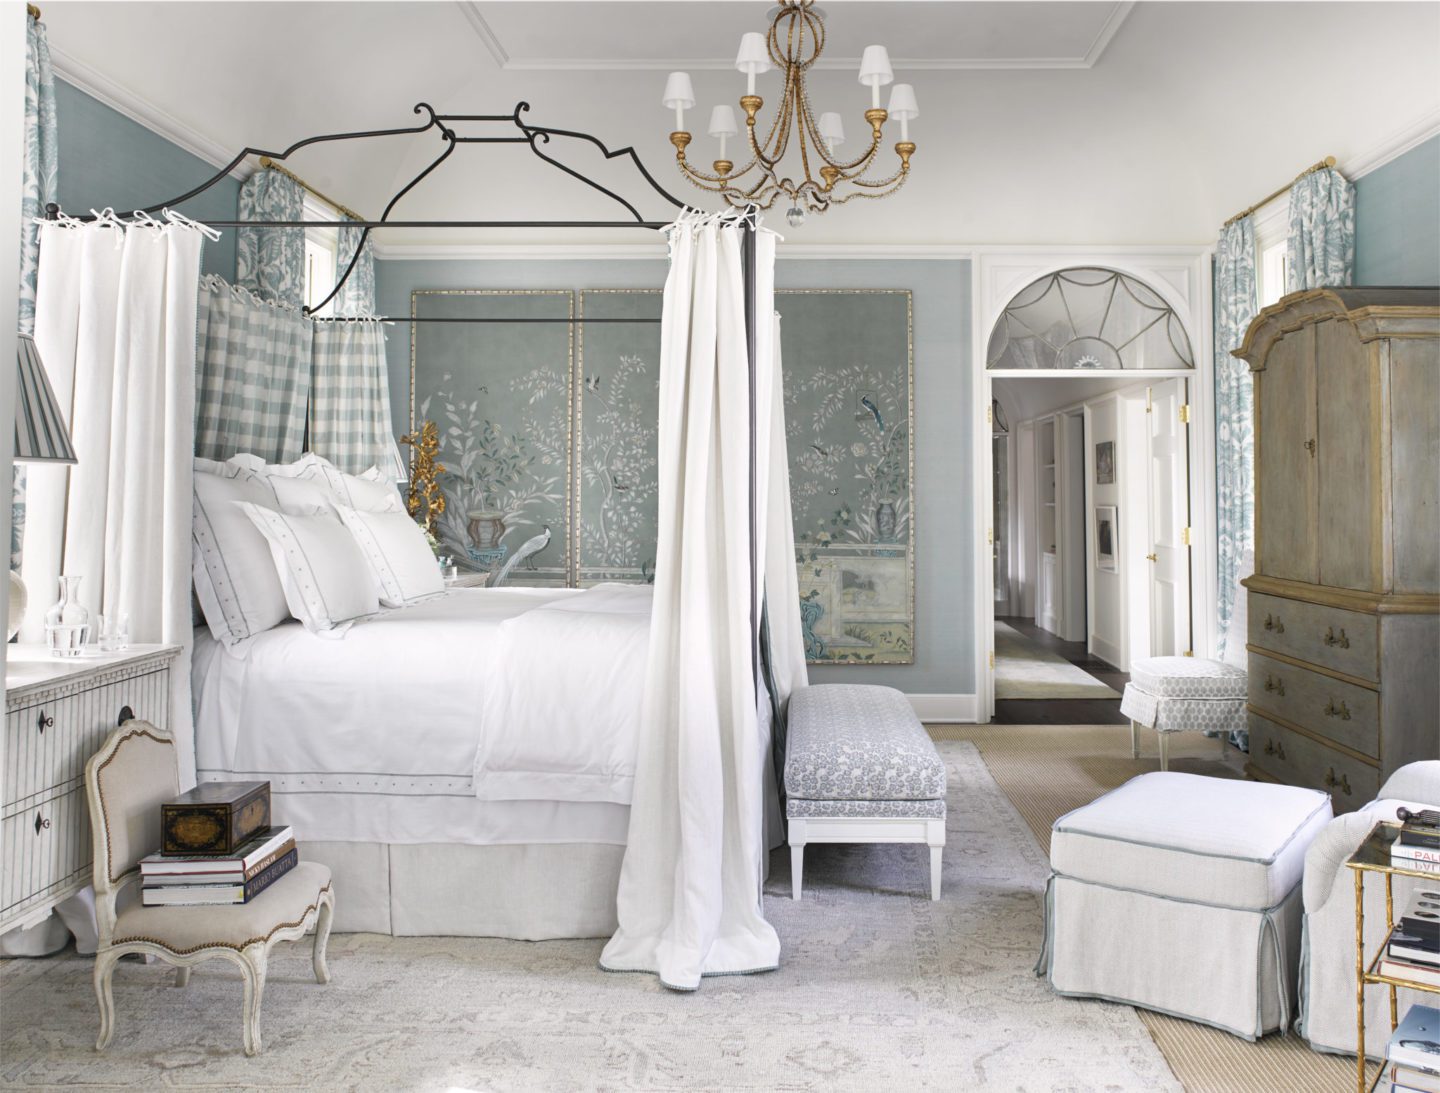 10 Southern Decor Favorites from the Southeastern Designer Showhouse